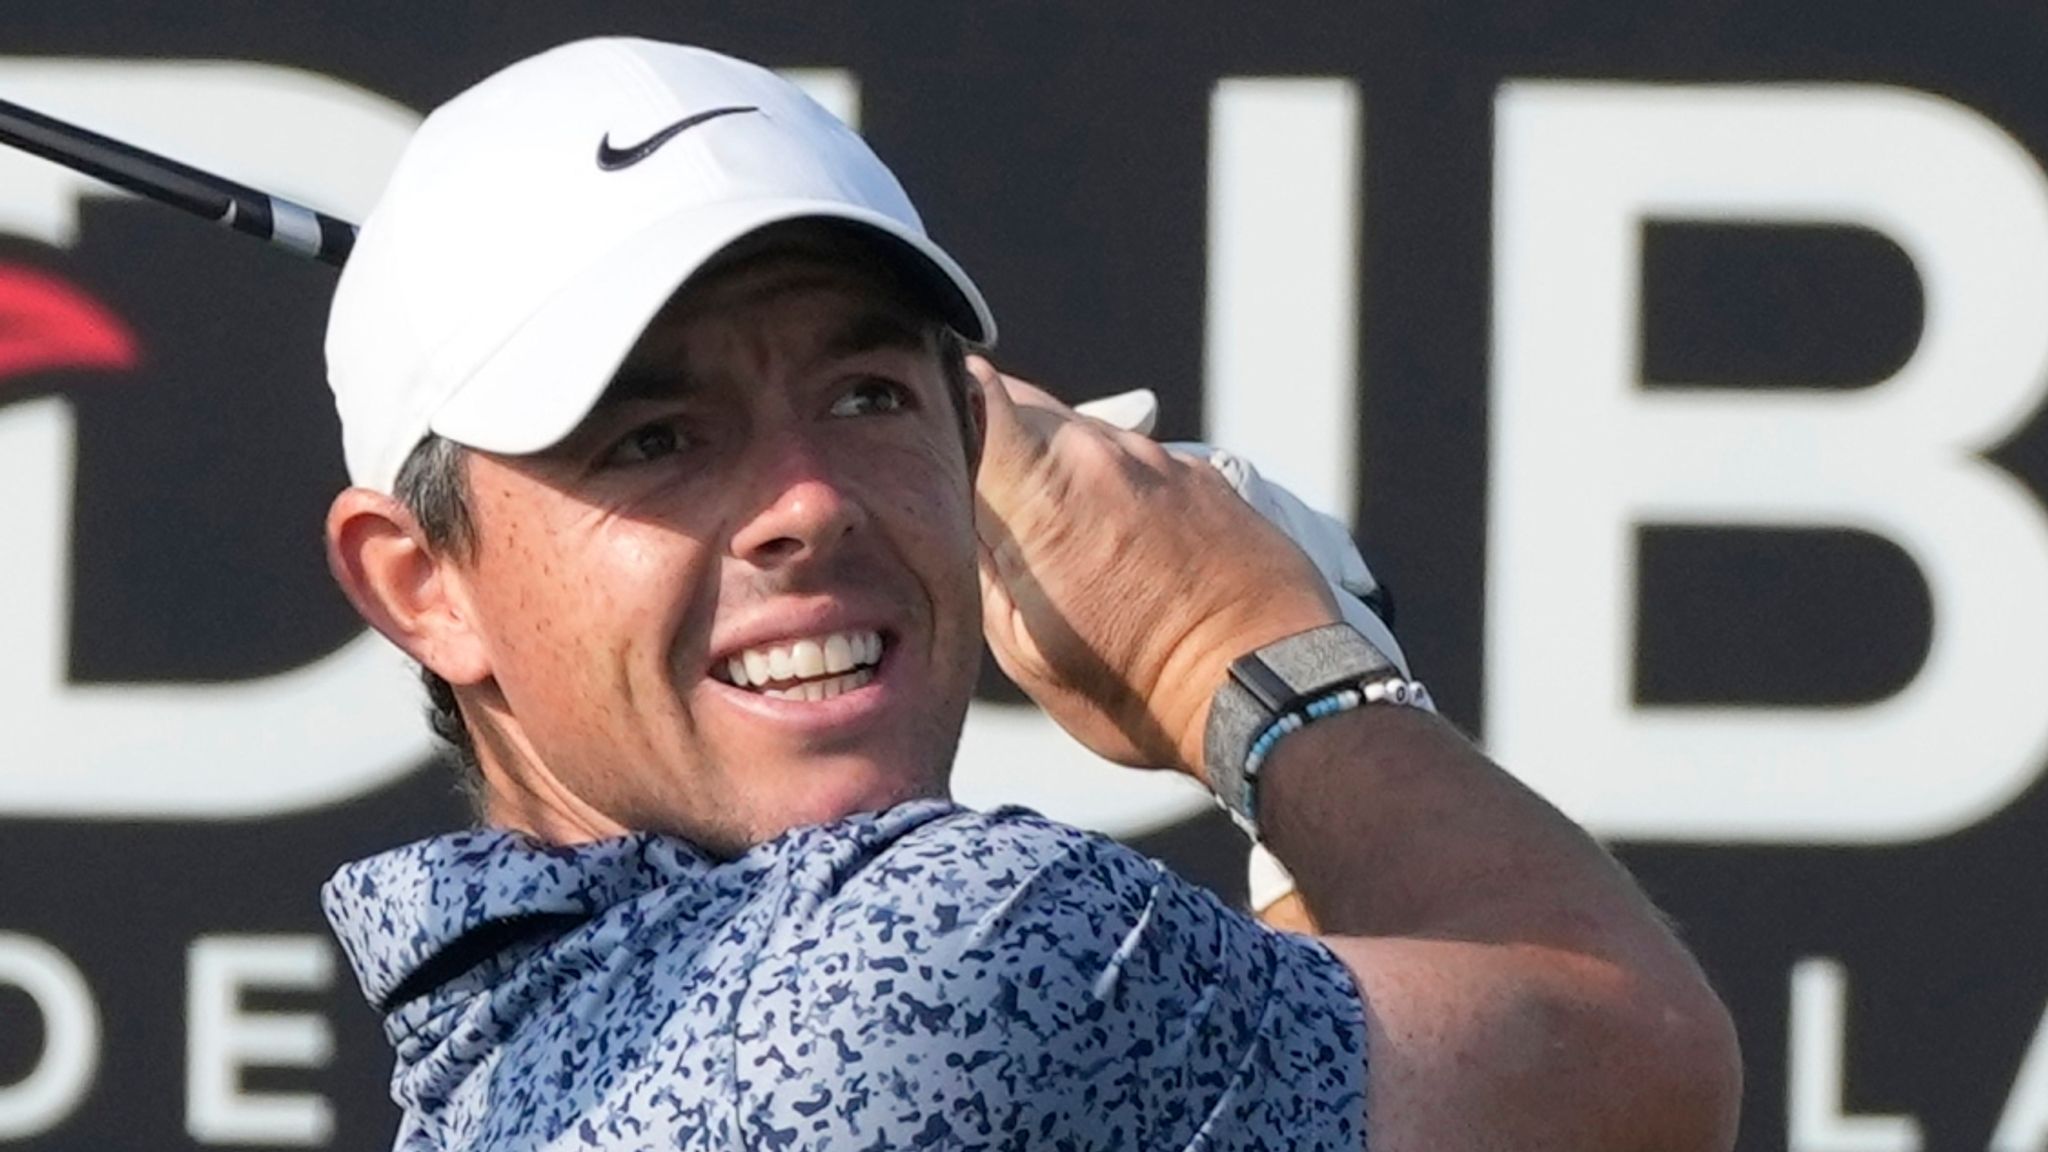 The three-time major champion will serve the rest of McIlroy's term, which  ends after 2024. See the full story at our link in bio.